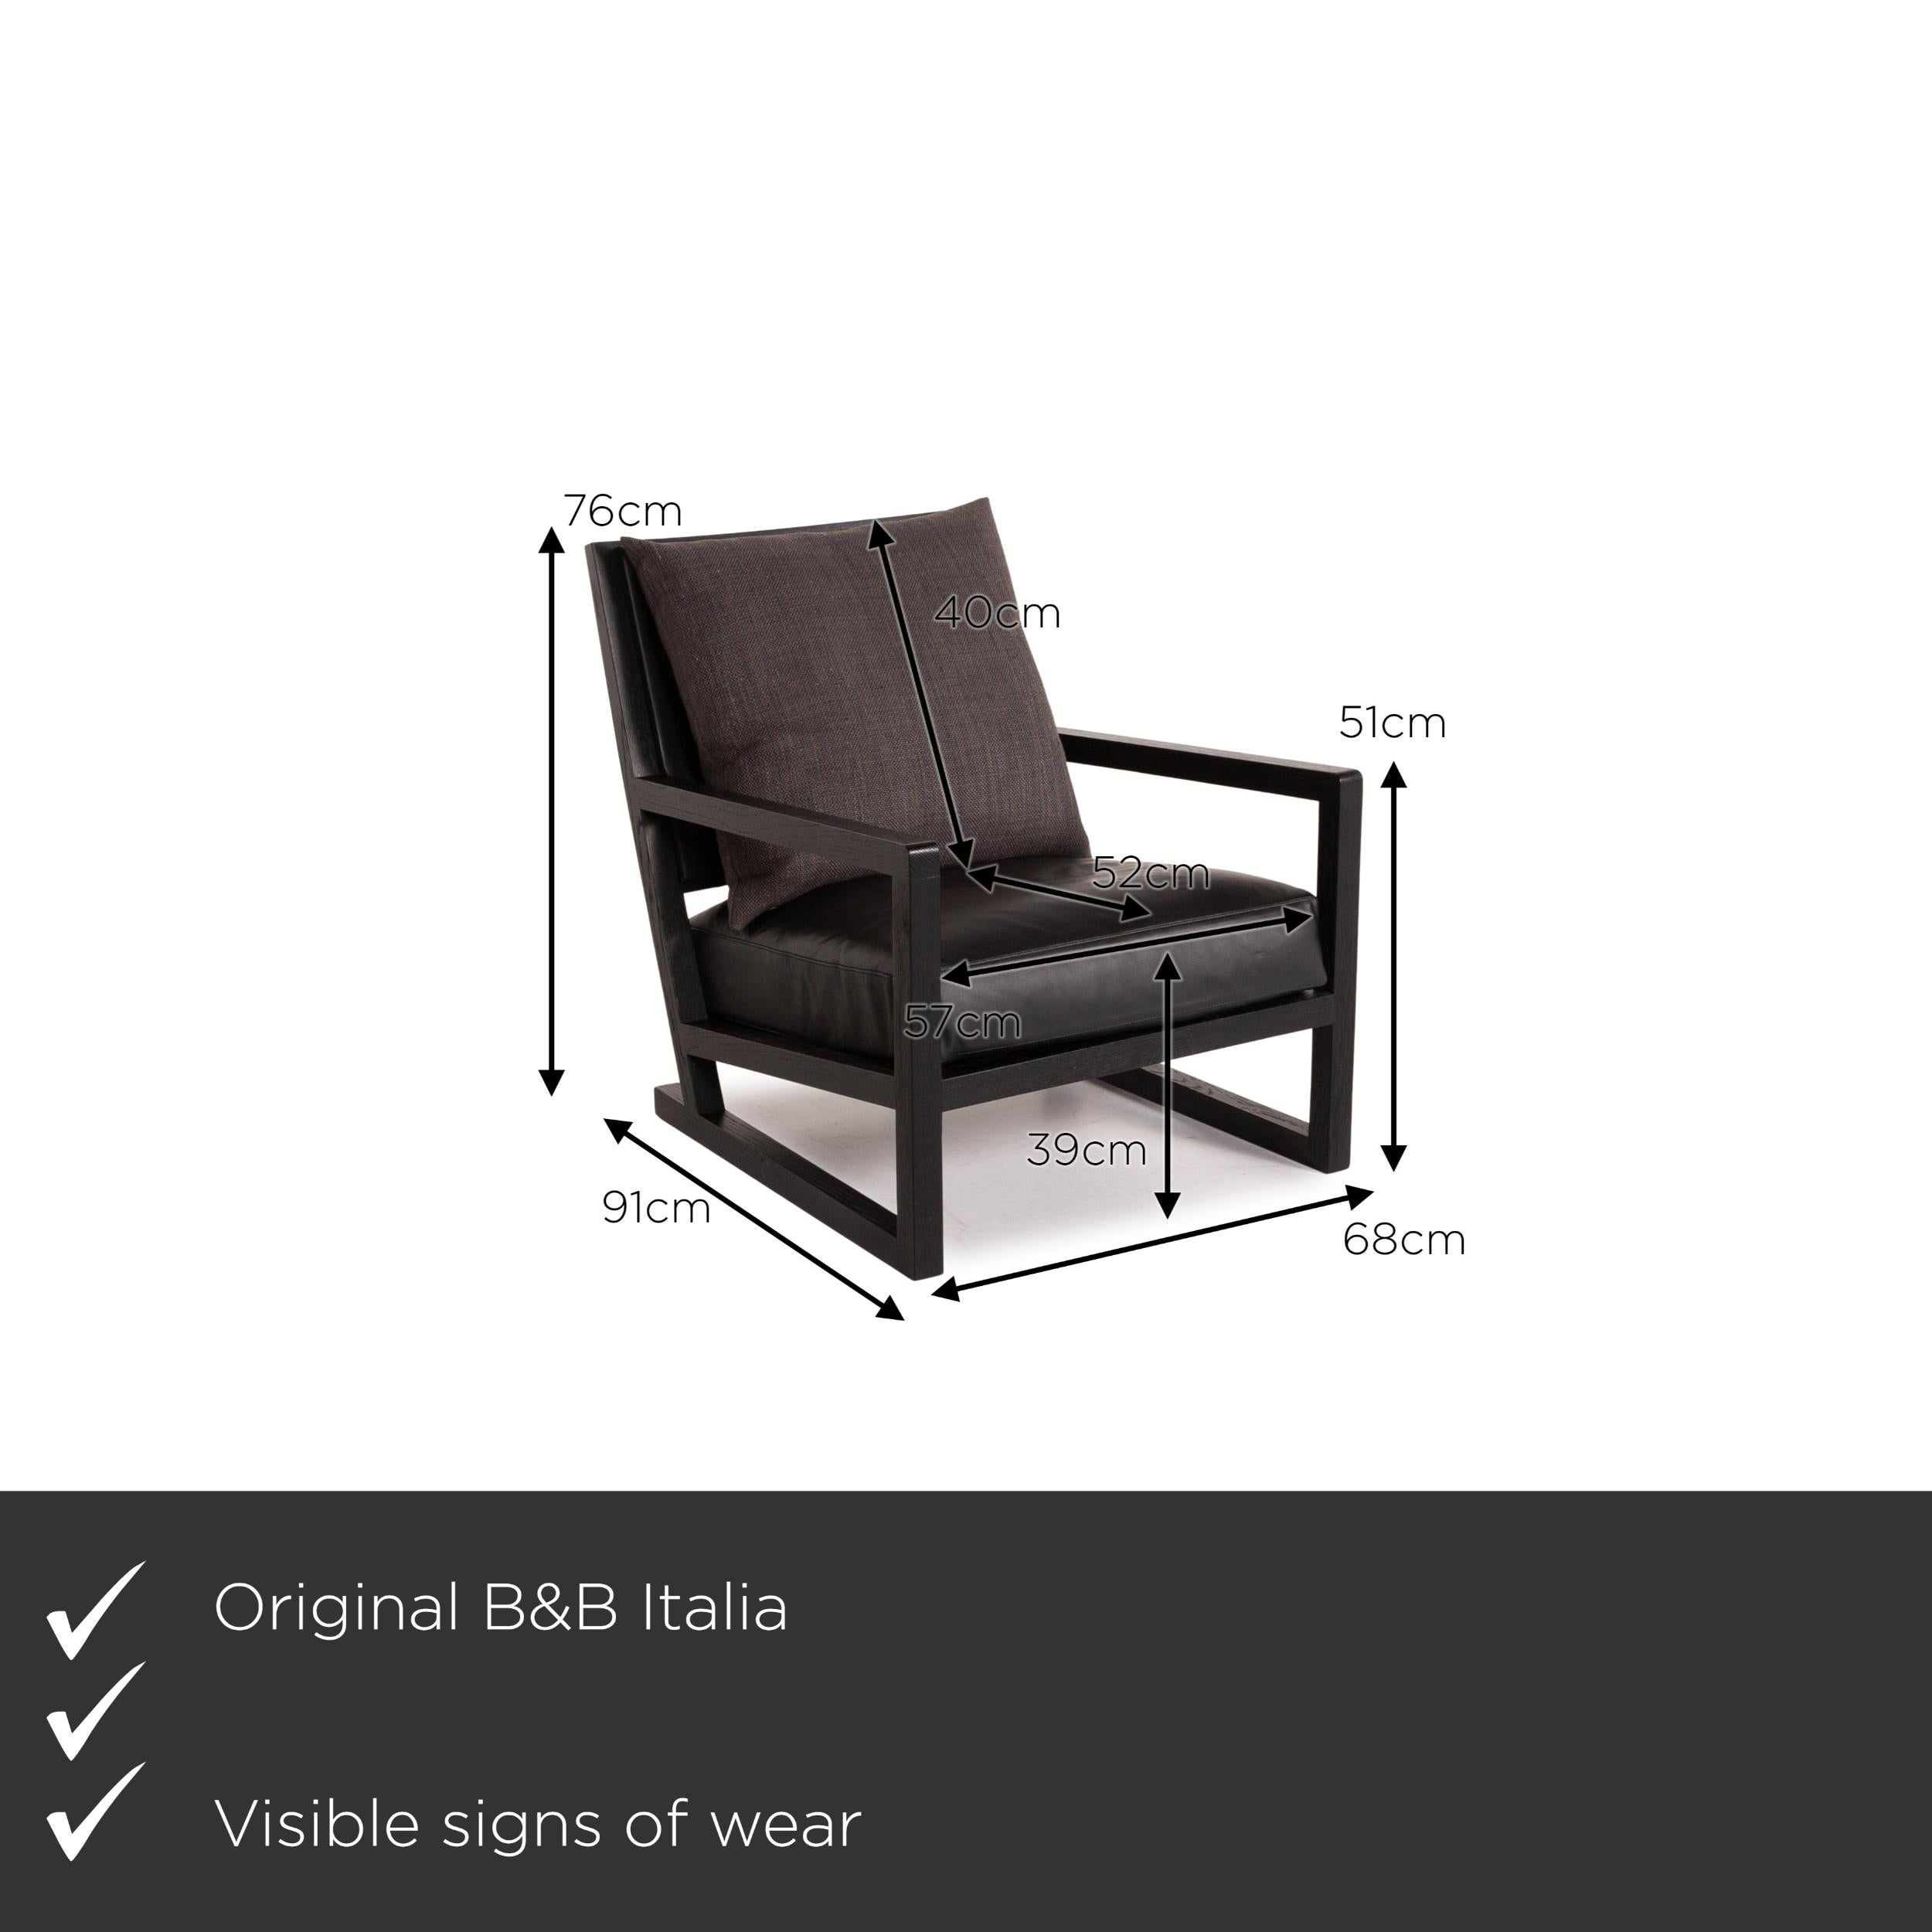 We present to you a B&B Italia Simplice leather fabric armchair black.

Product measurements in centimeters:

Depth 91
Width 68
Height 76
Seat height 39
Rest height 51
Seat depth 52
Seat width 57
Back height 40.
 
 
   